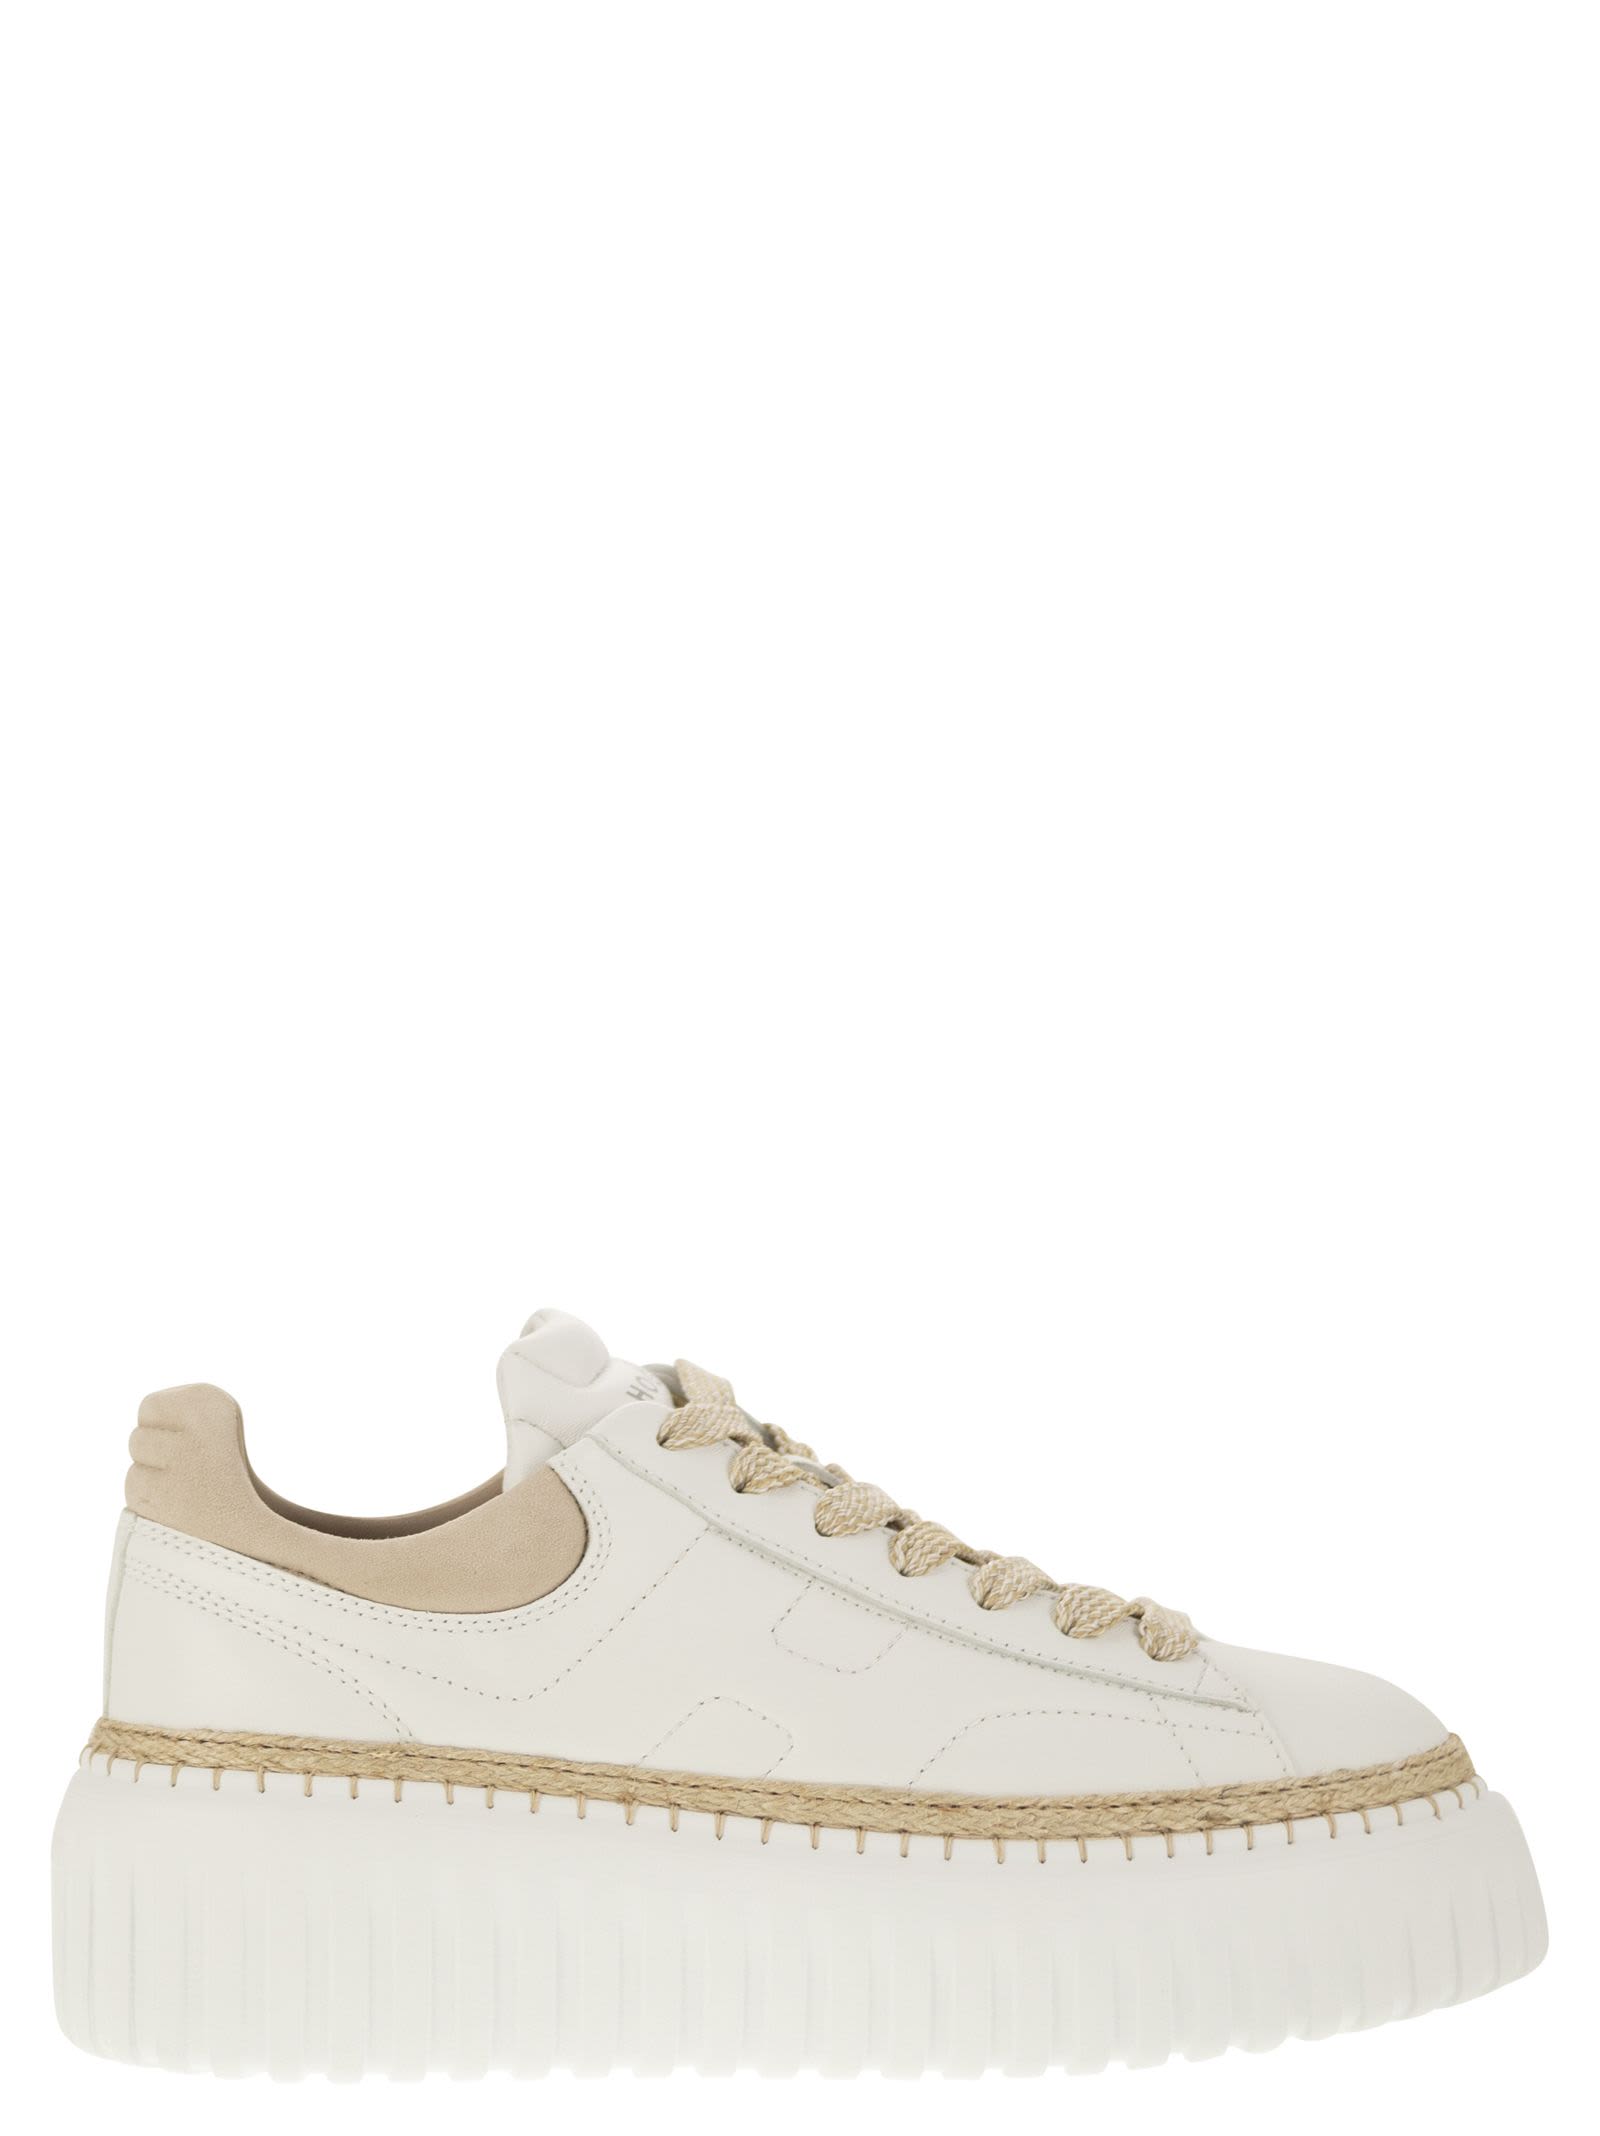 Hogan H-stripes - Trainers In White